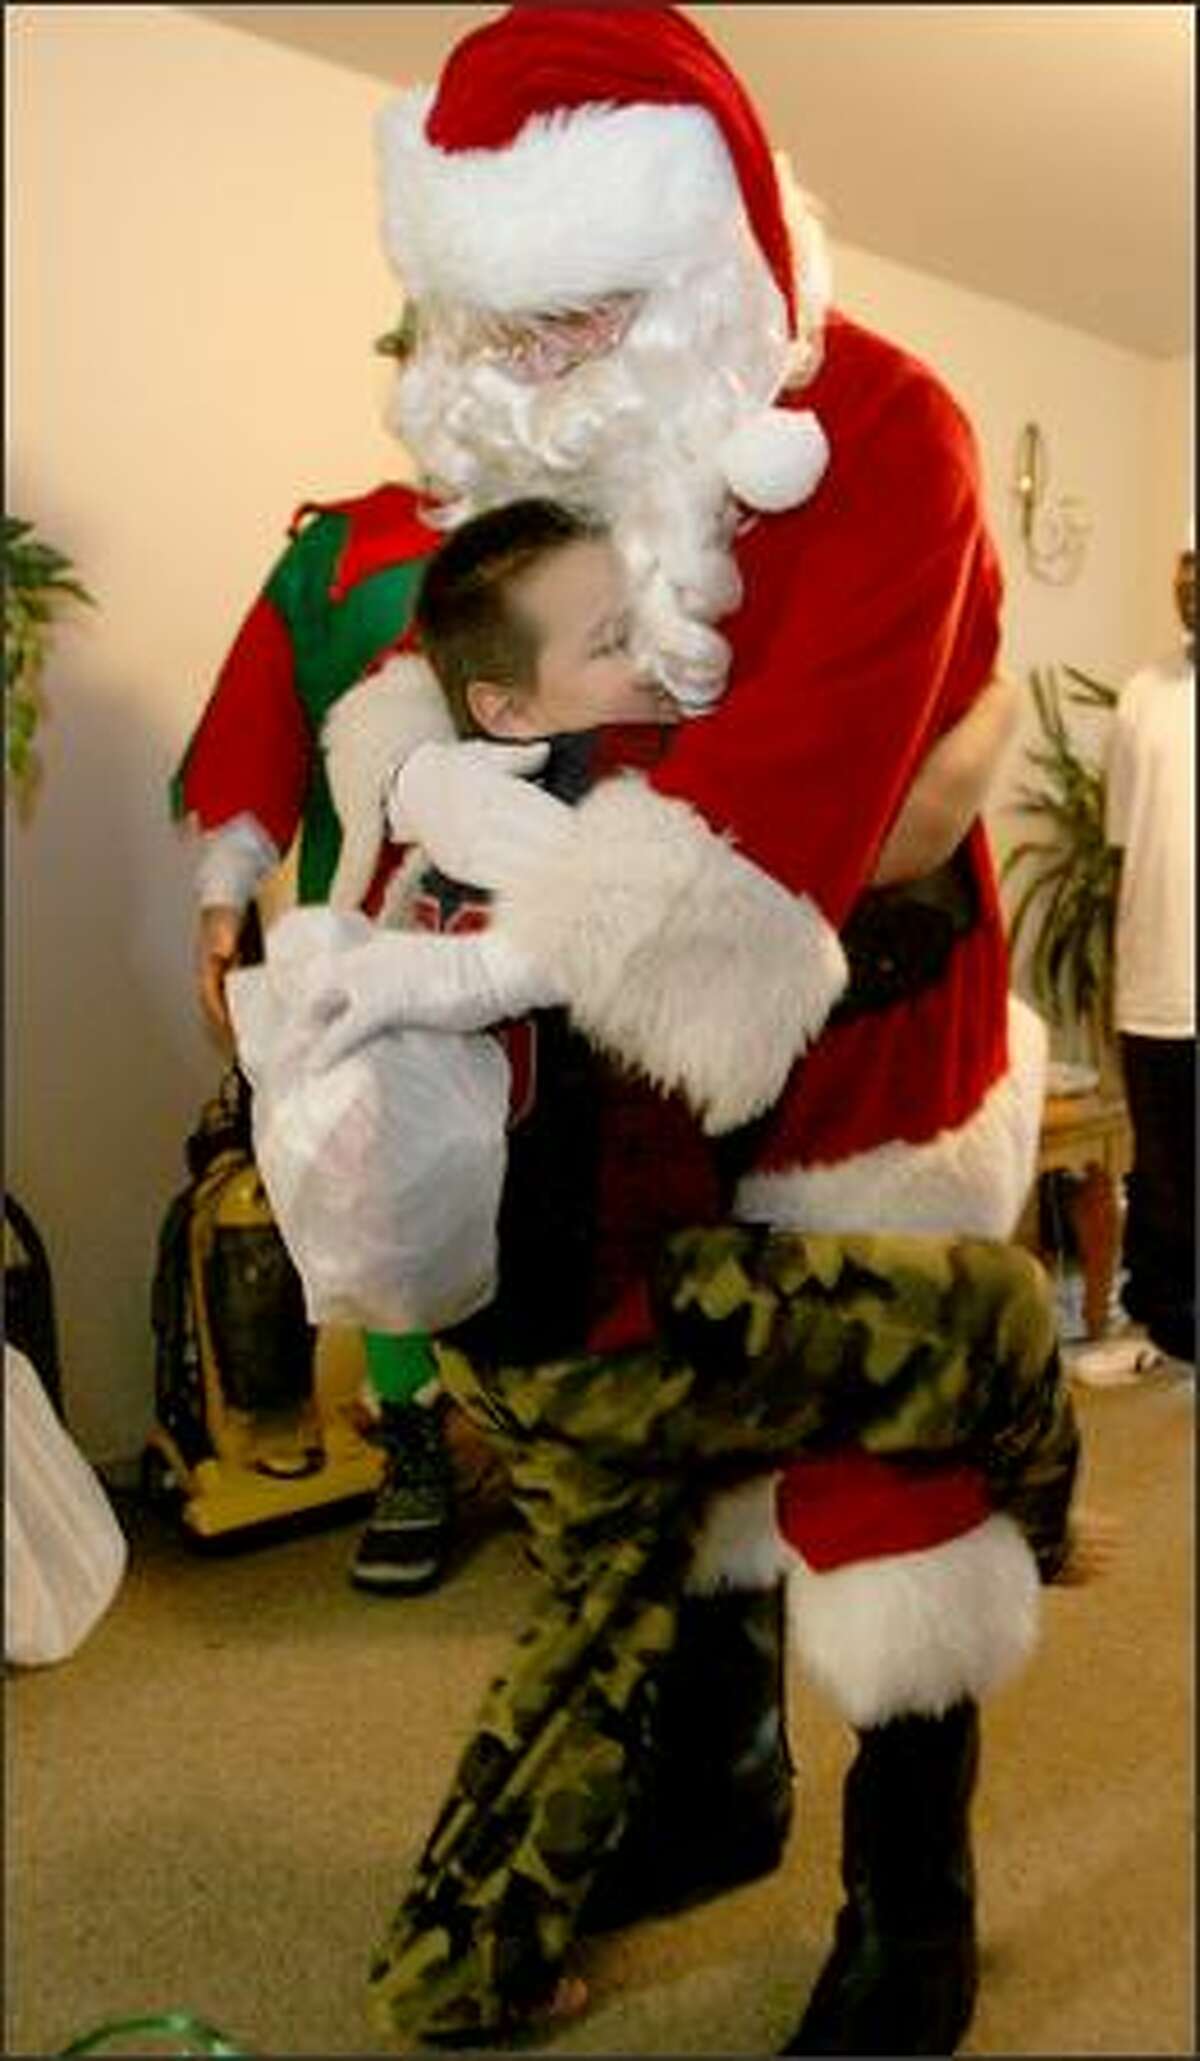 Although tenative at first, Aaron, 7, warmed up to Santa with the Forgotten Children's Fund as he gives him a big hug at his apartment in Seattle.